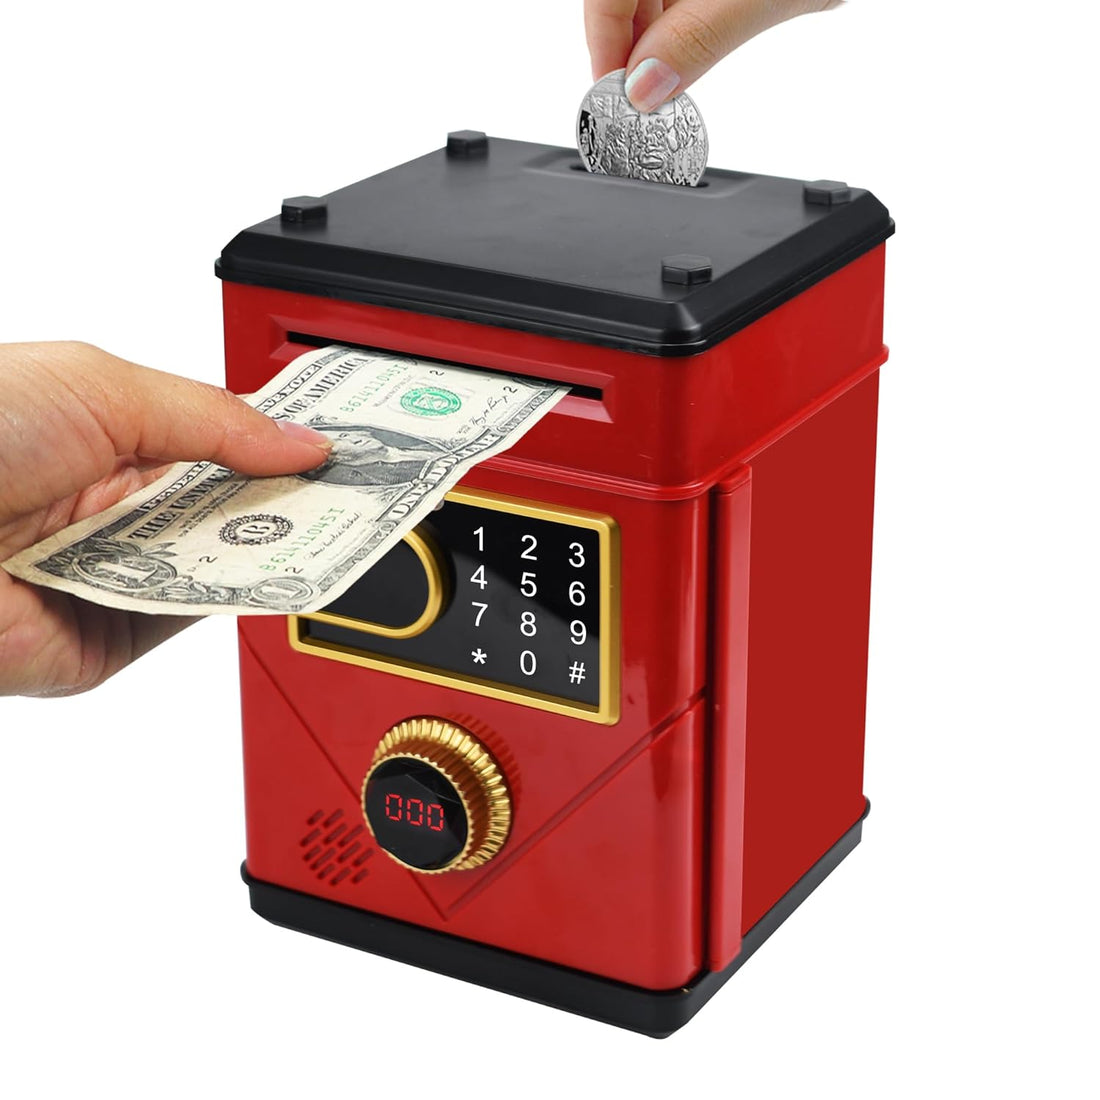 Veilxty Touch Screen Piggy Bank Electronic Password Piggy Bank for Kids, Music Piggy Bank Counting Money Bank Coin Bank ATM Banks for Boys and Girls (Red)